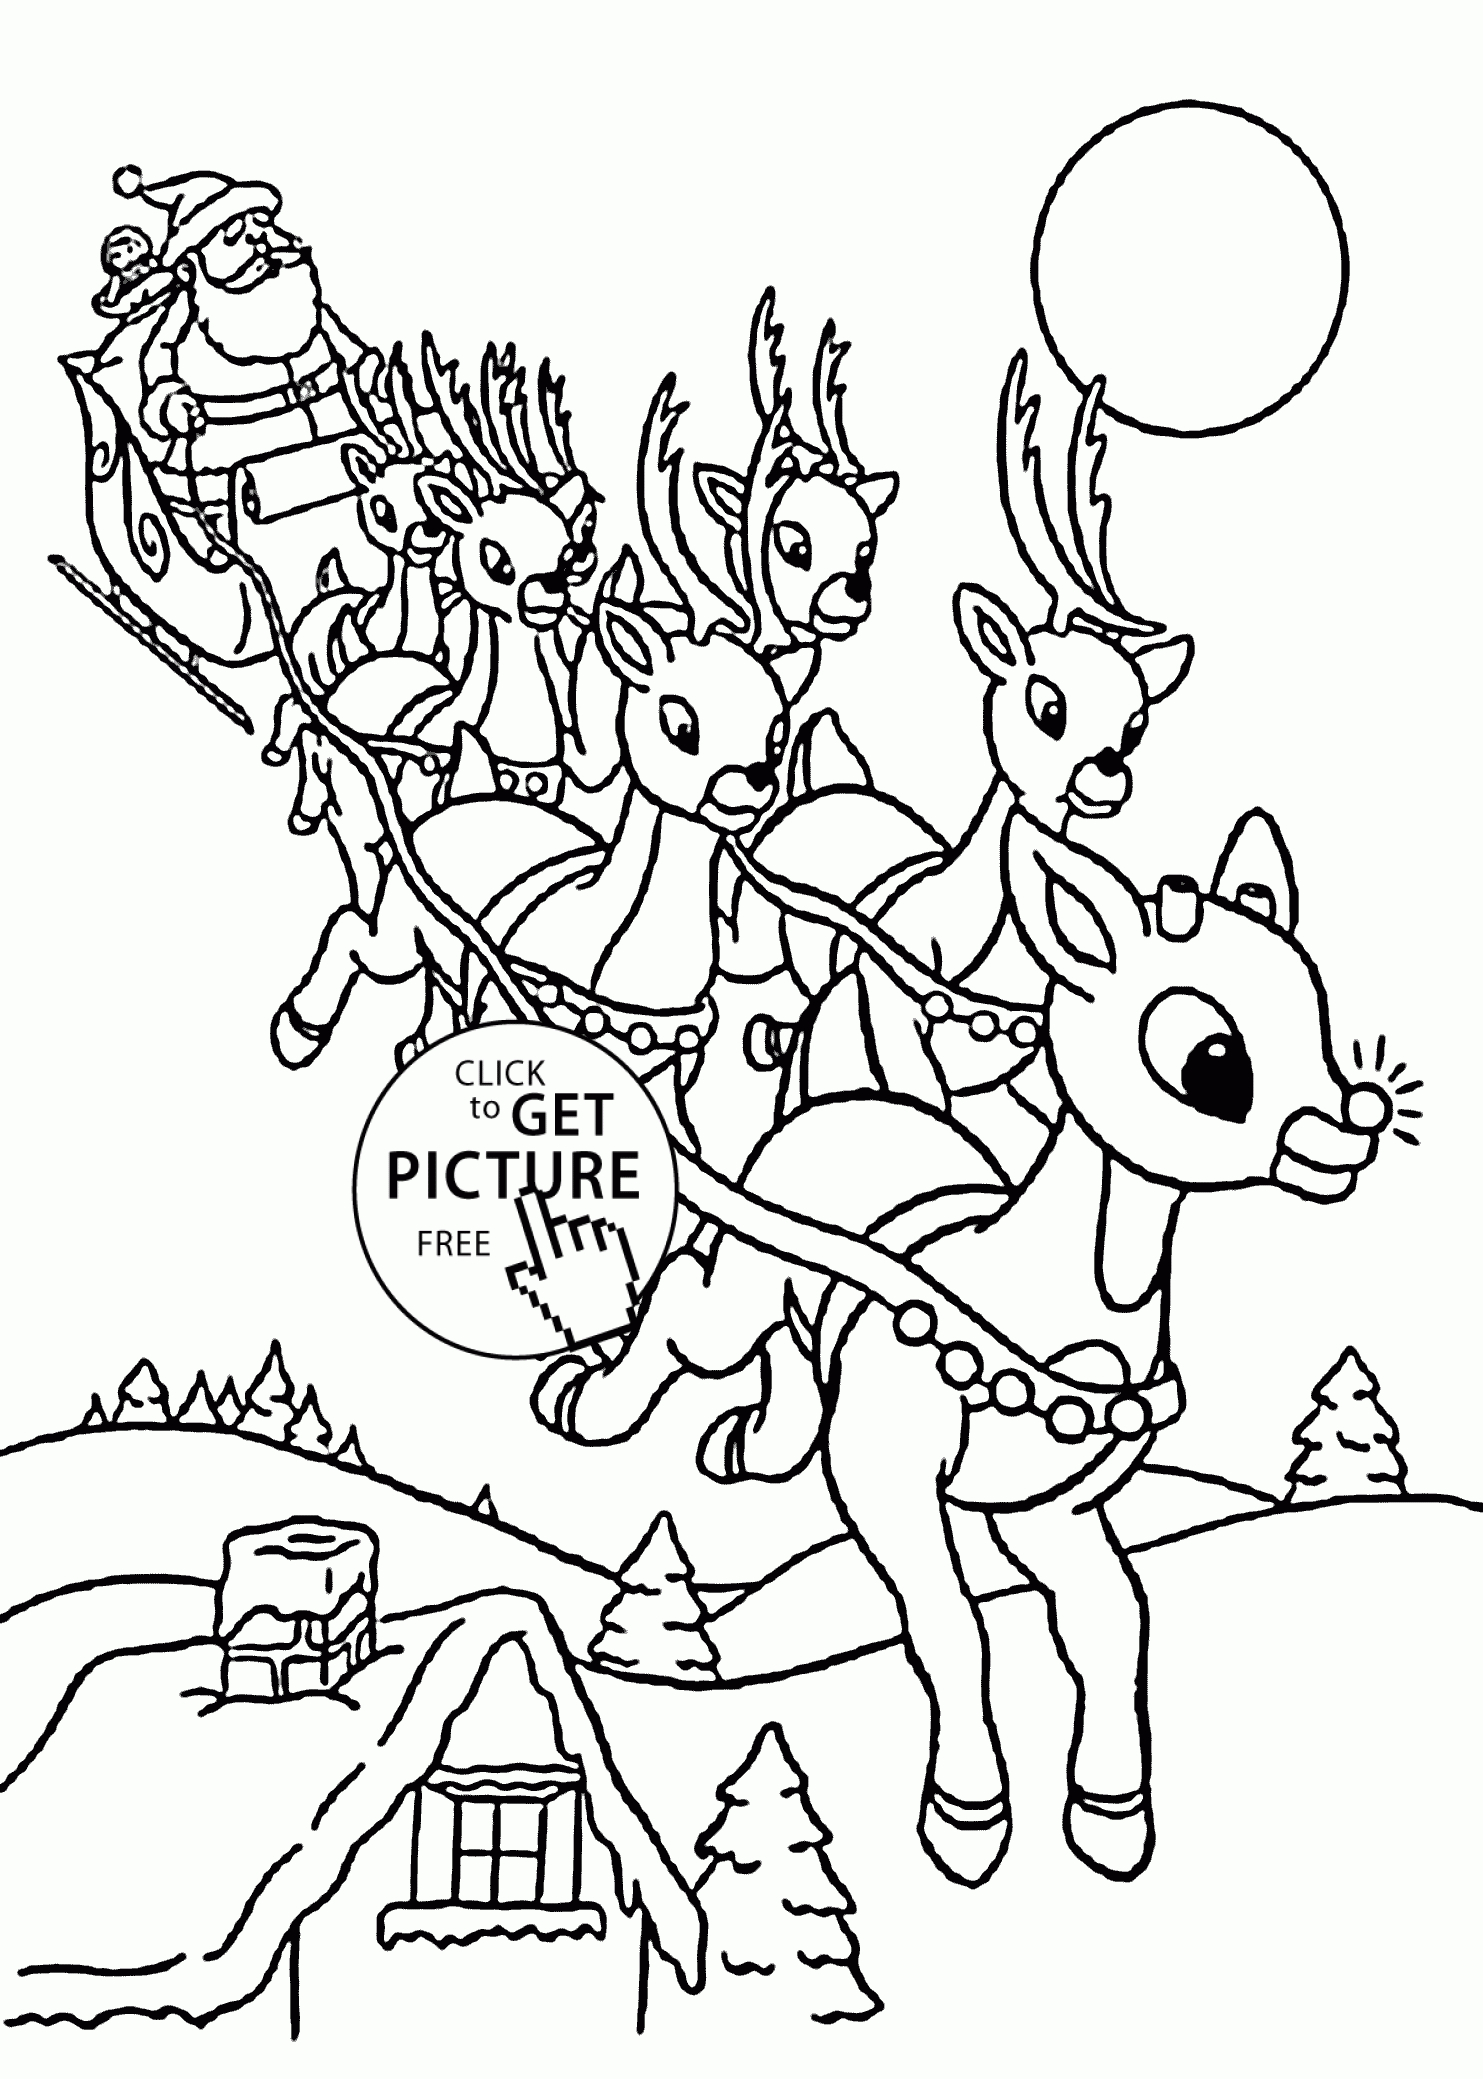 Rudolph And Santa Claus Coloring Pages For Kids, Printable Free - Free Printable Christmas Cartoon Coloring Pages